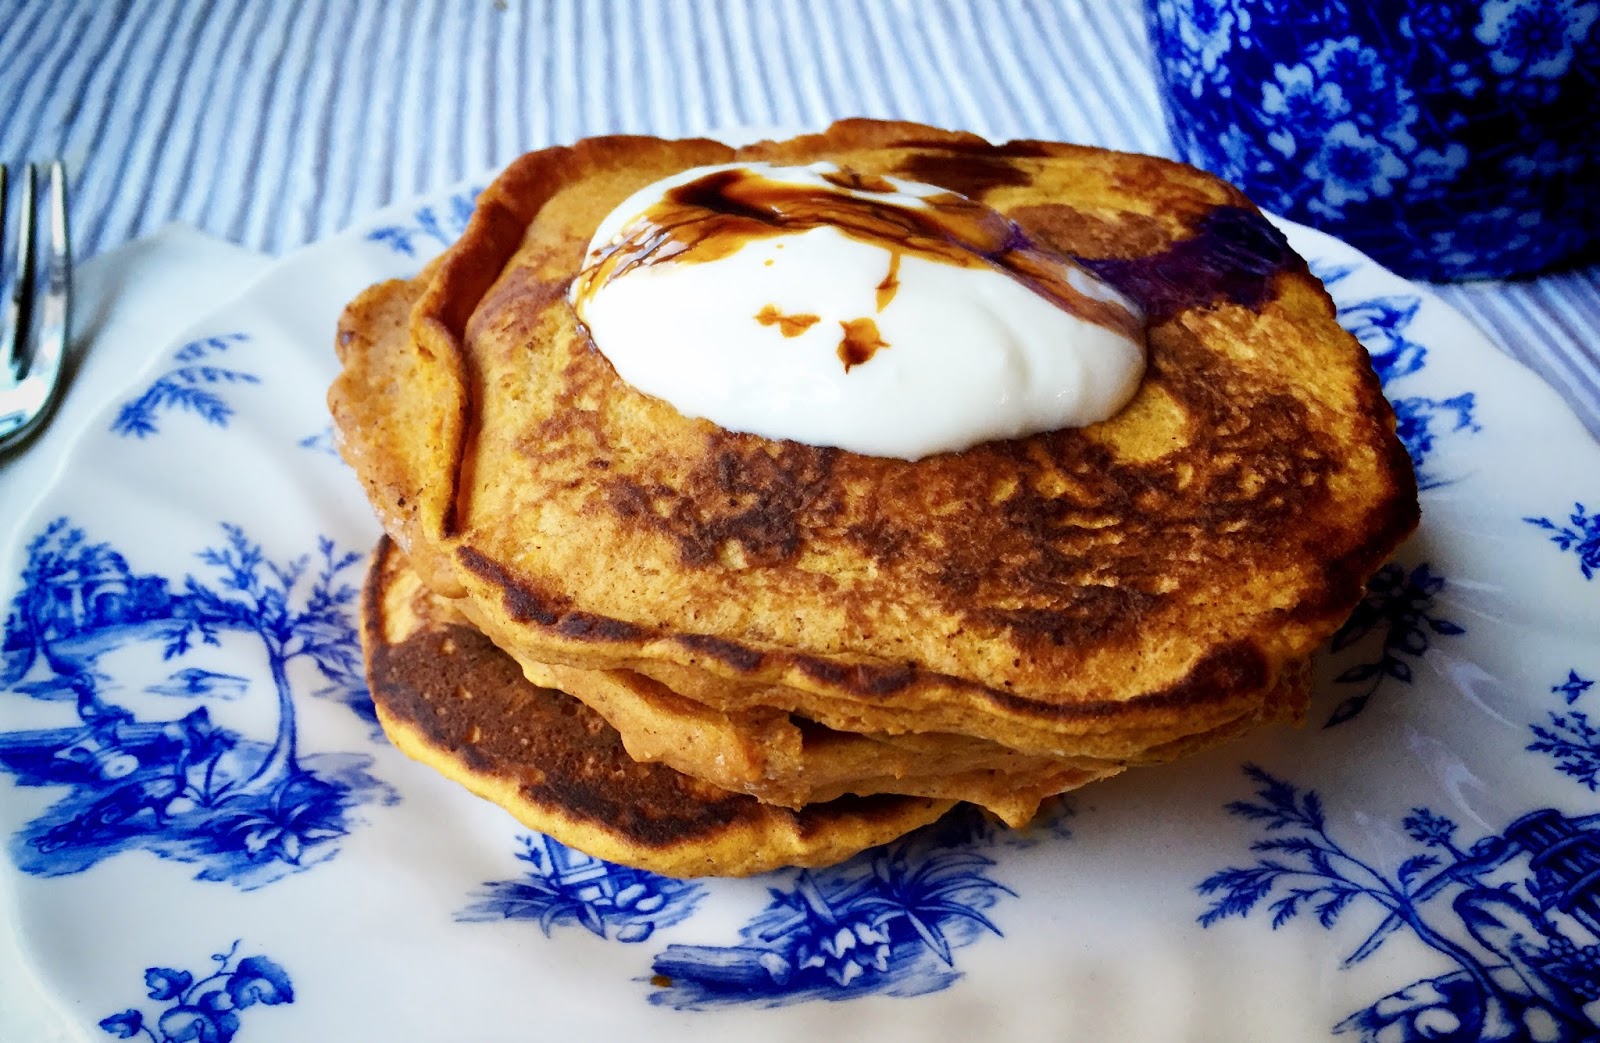 Recipe for quick potato pancakes from Jacques Pepin.